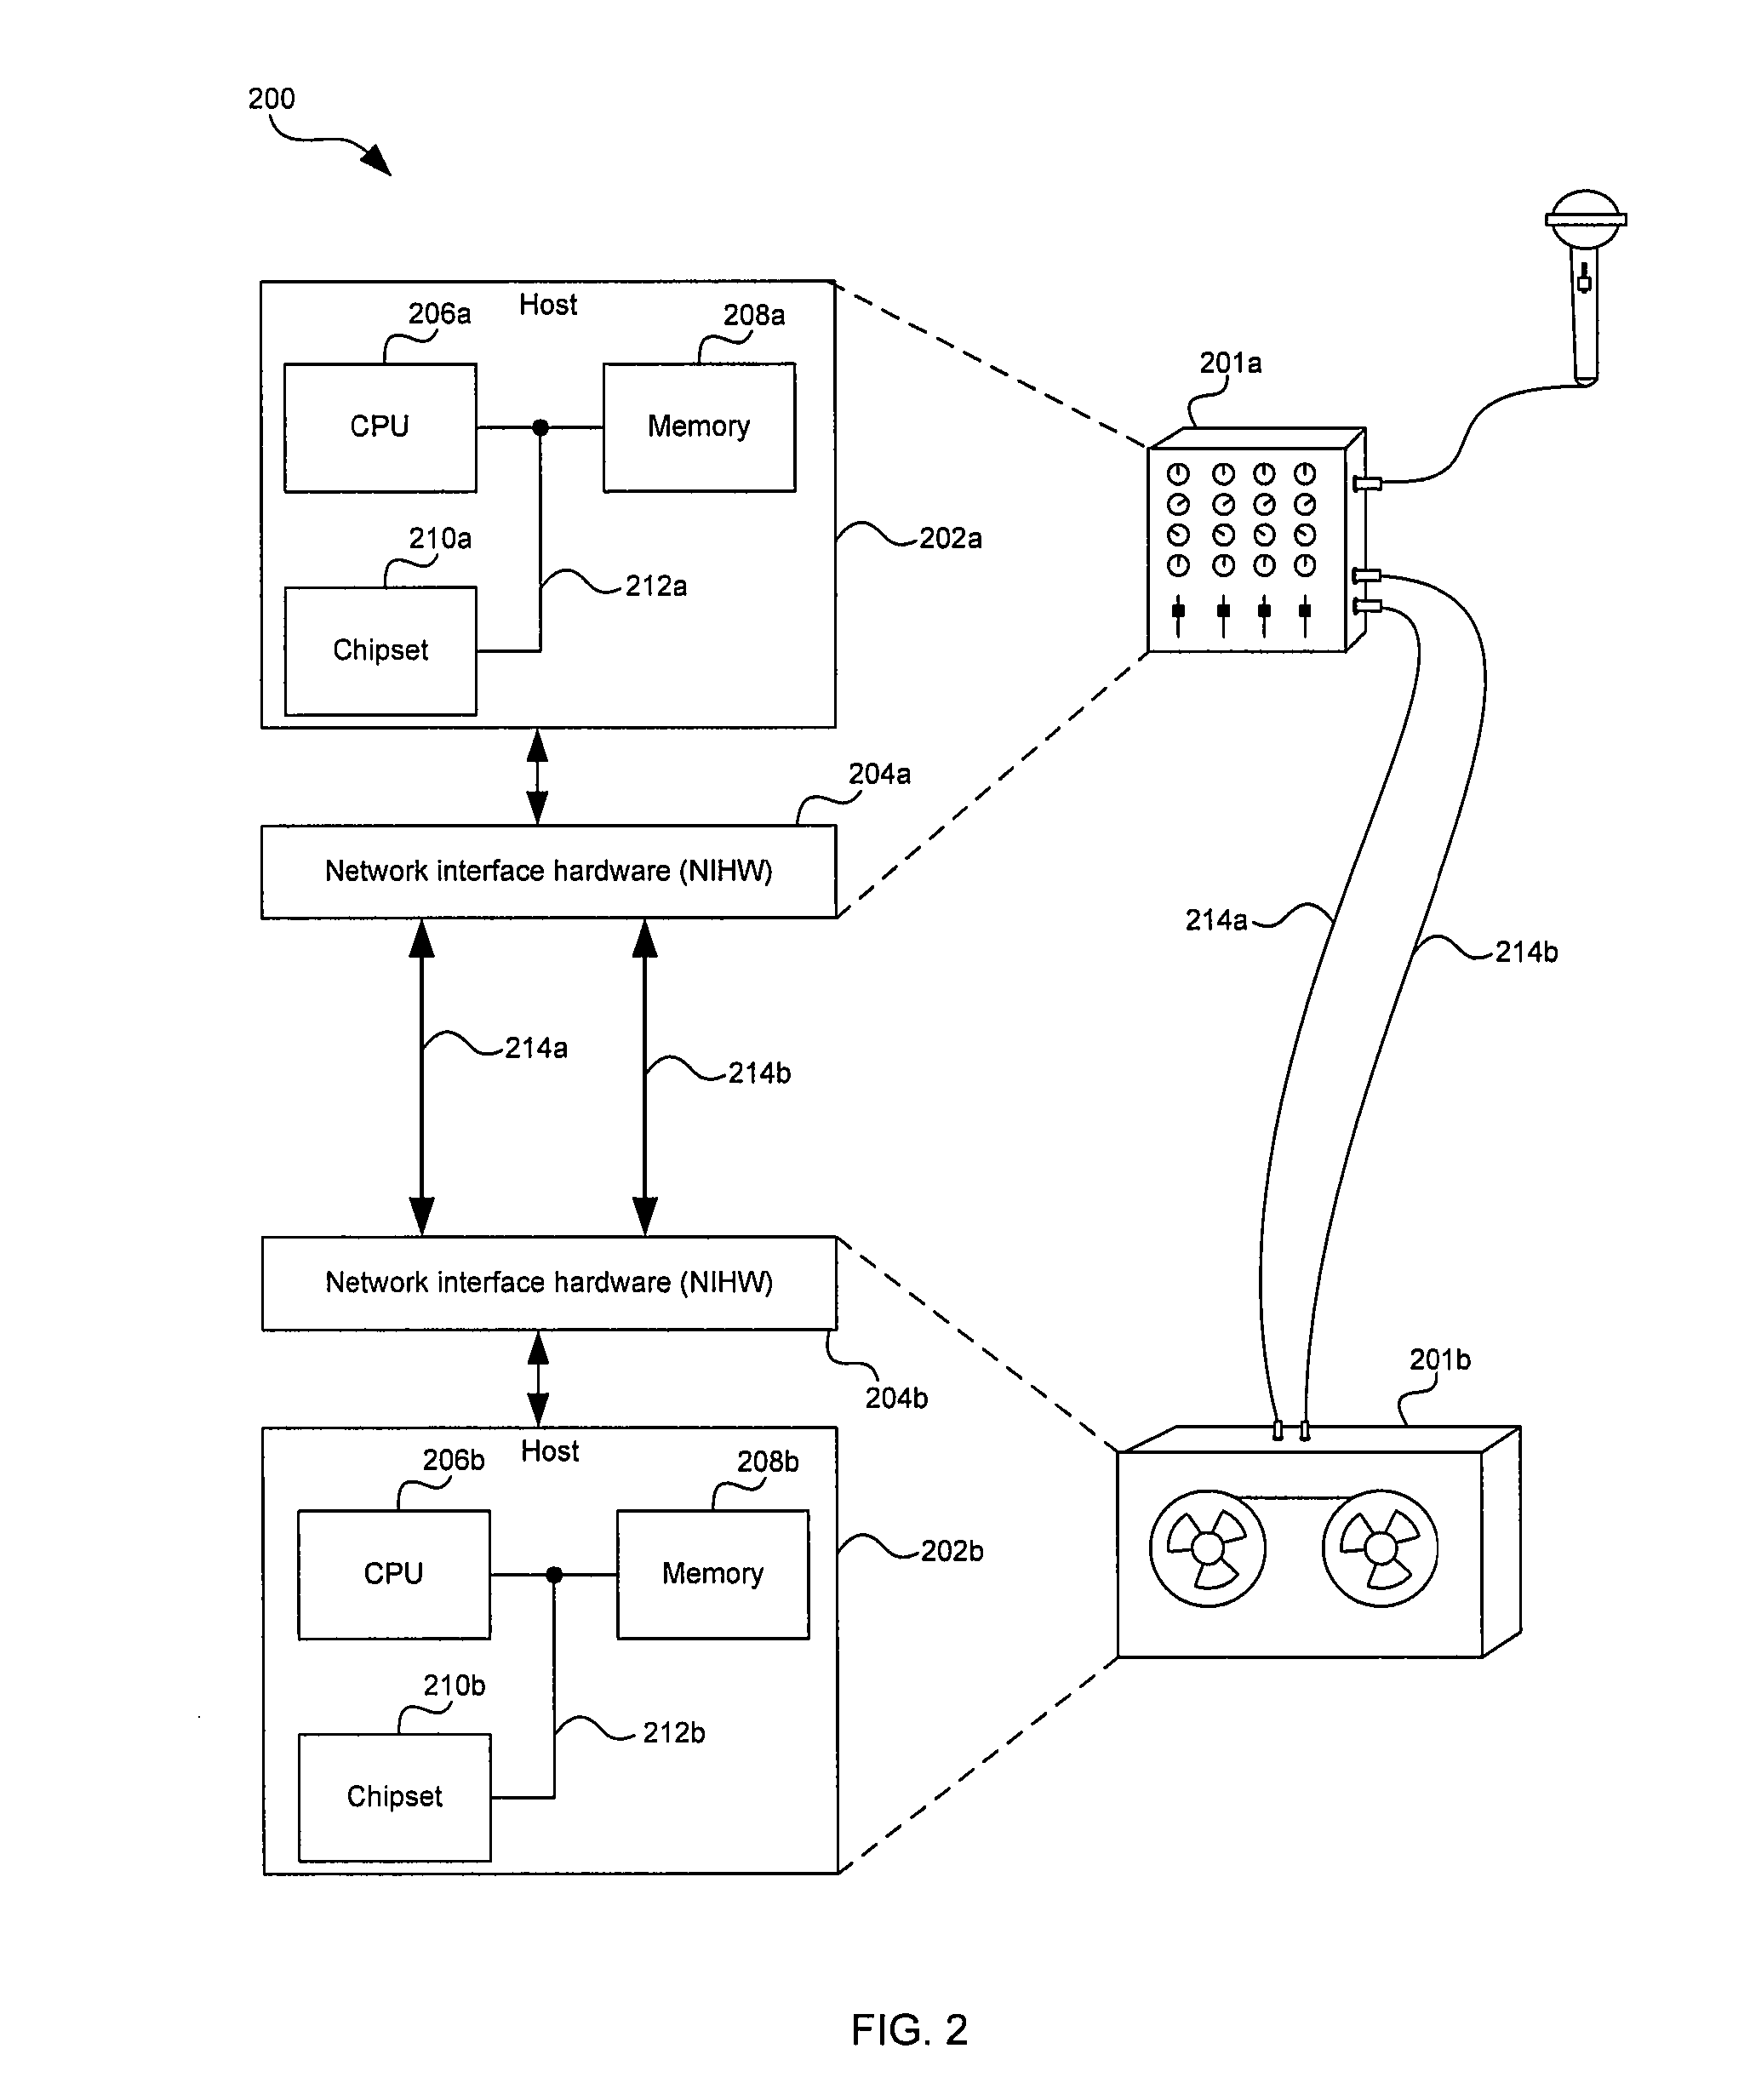 Method and system for implementing redundancy for streaming data in audio video bridging networks